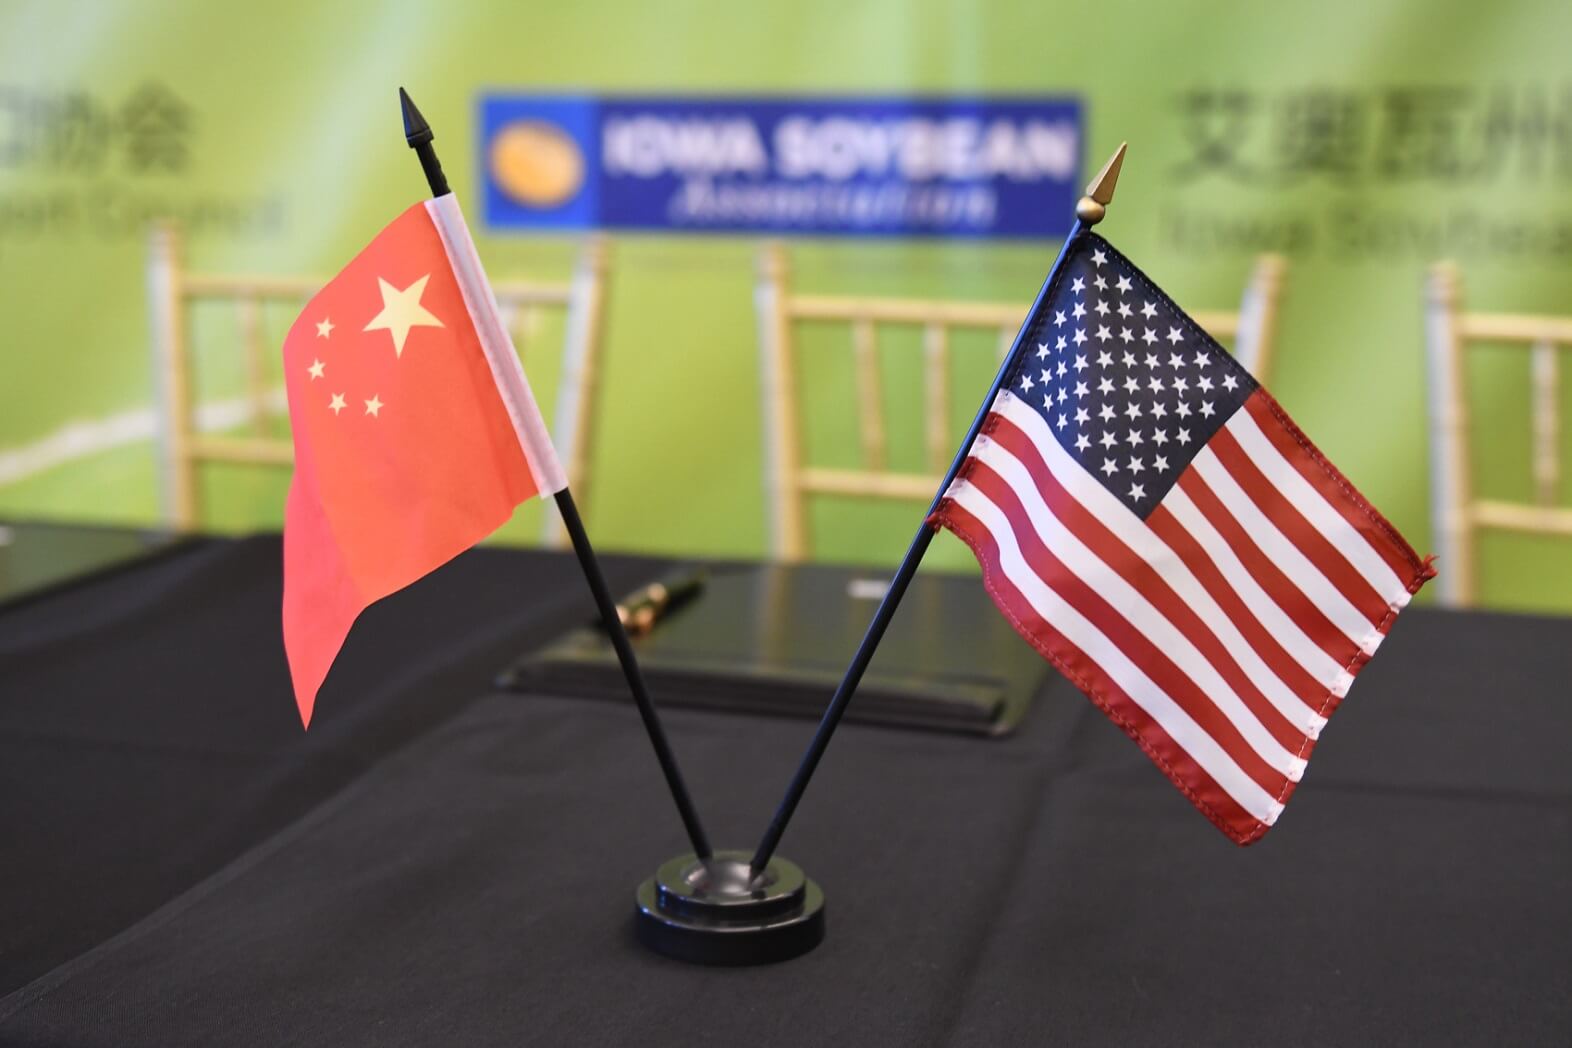 U.S. flag next to Chinese flag on small stand